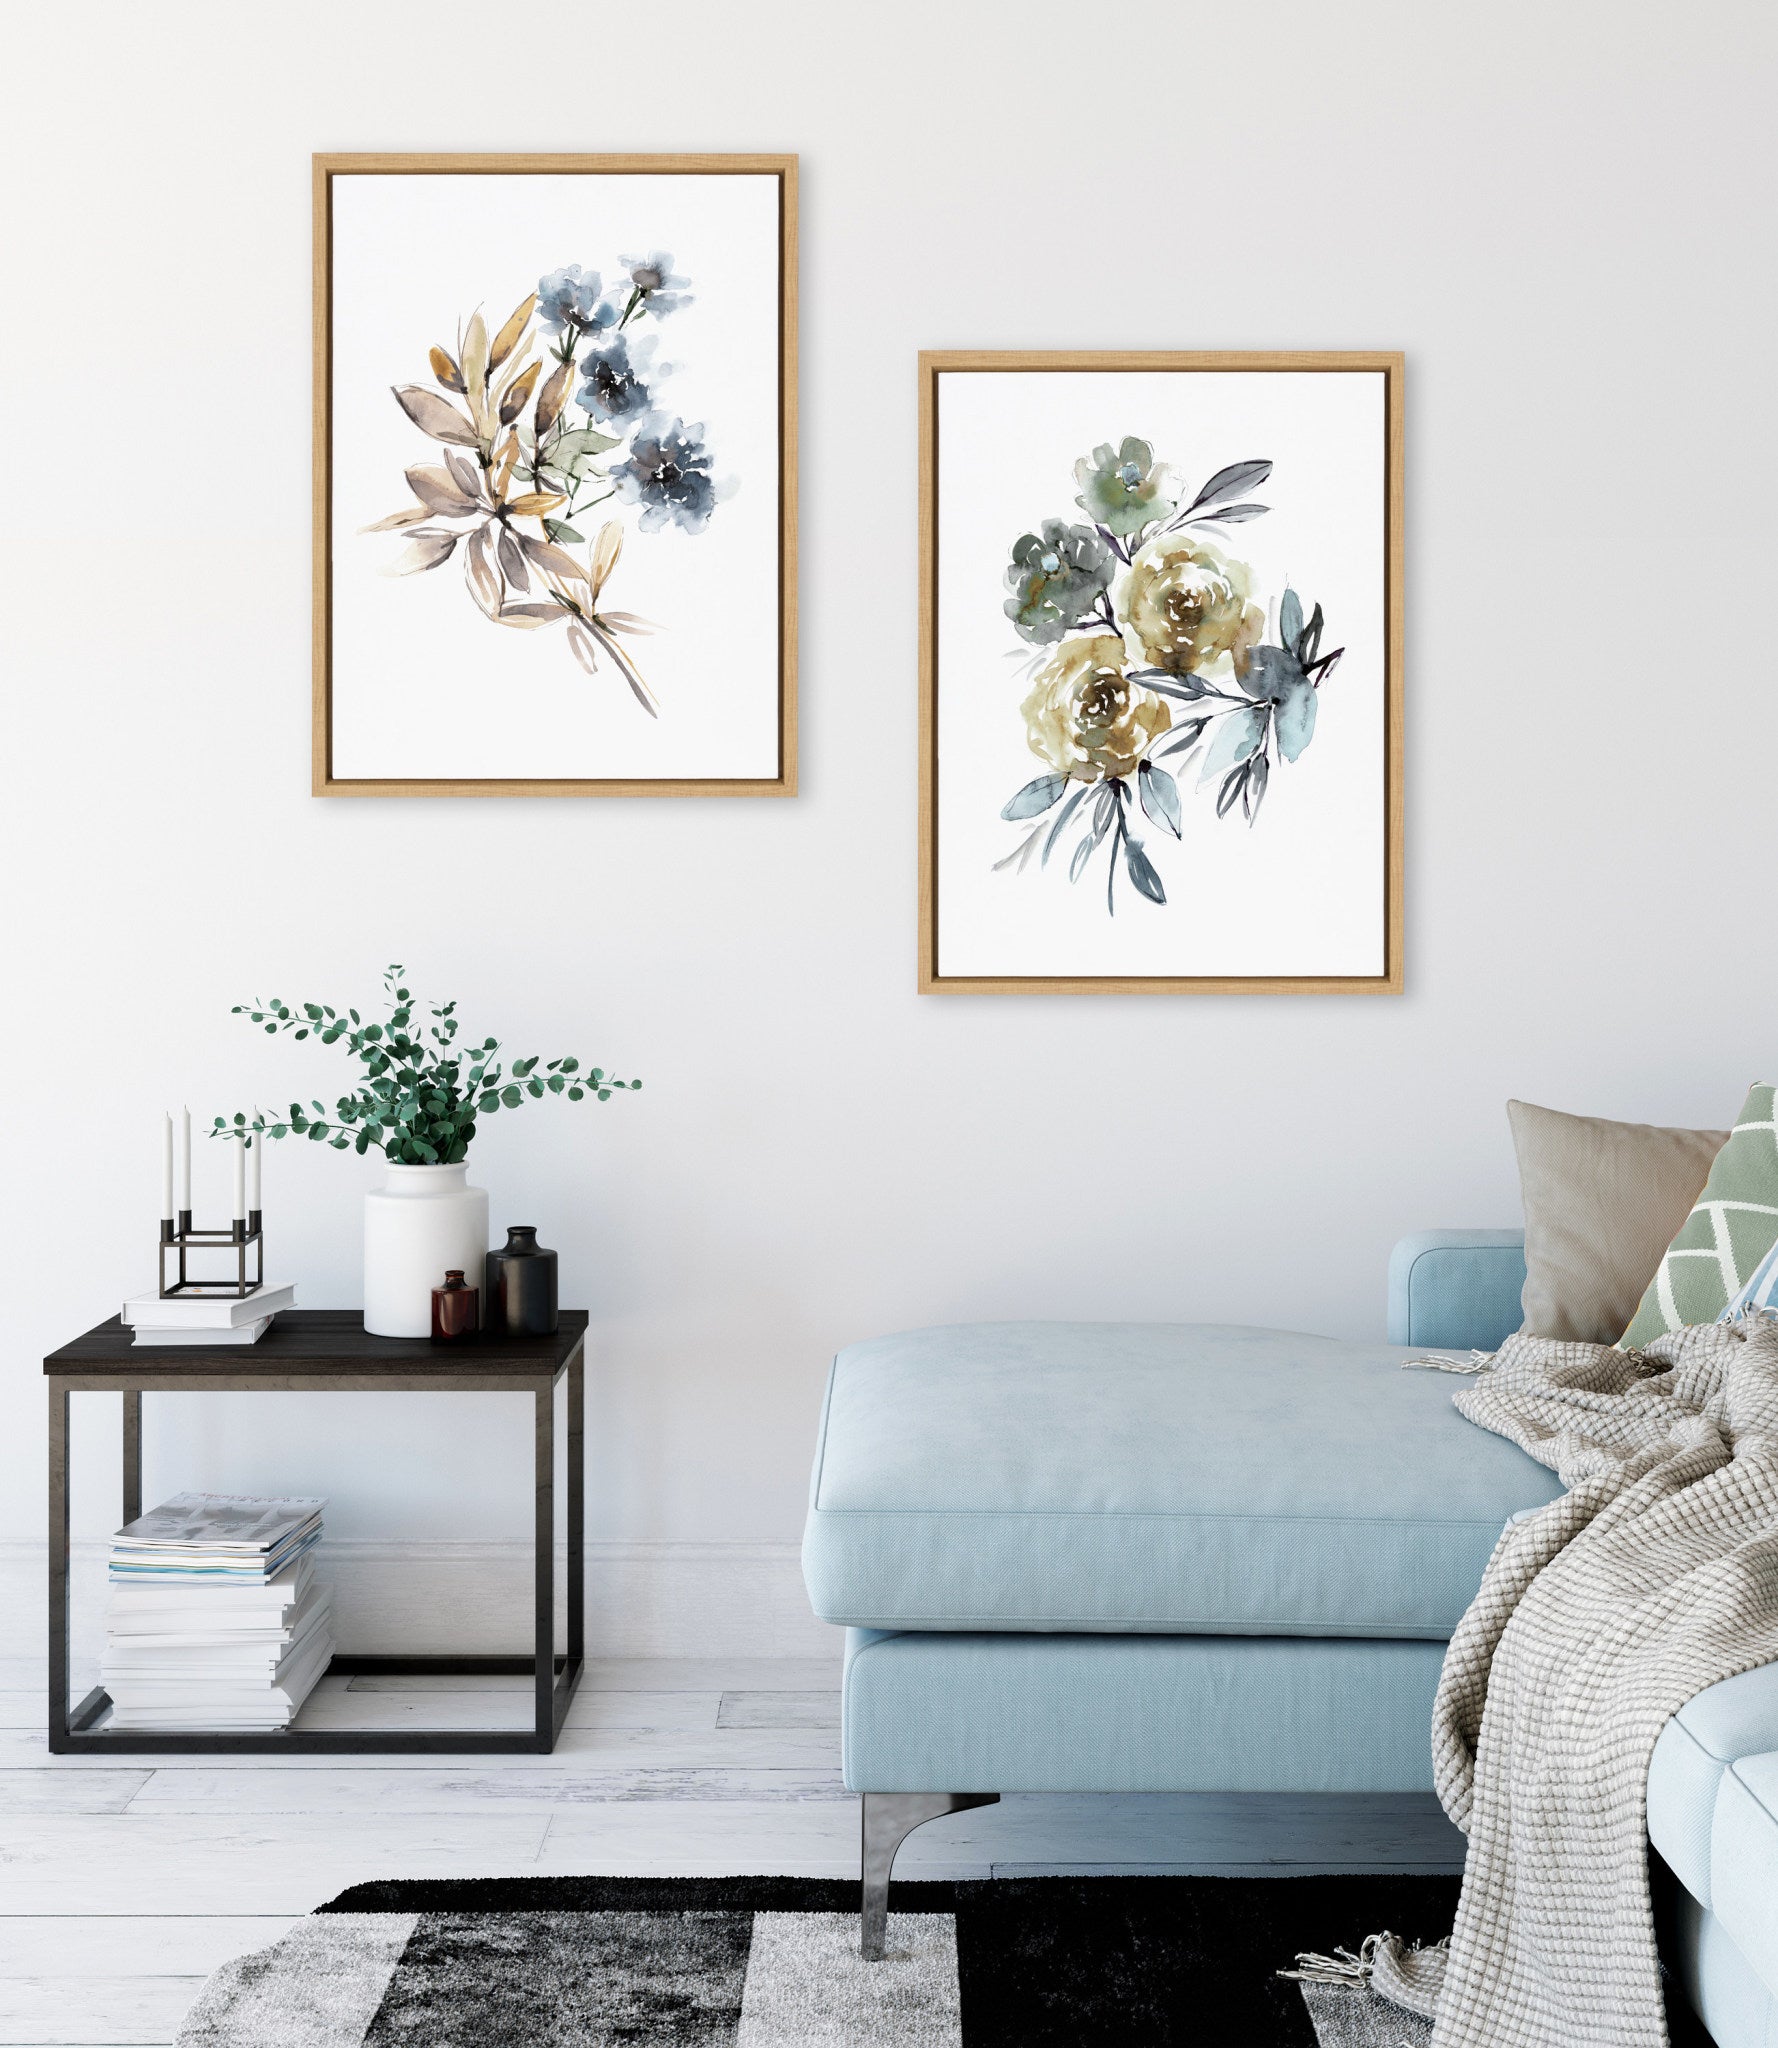 Sylvie Yellow Roses and Muted Blue Flowers Framed Canvas Art Set by Sara Berrenson